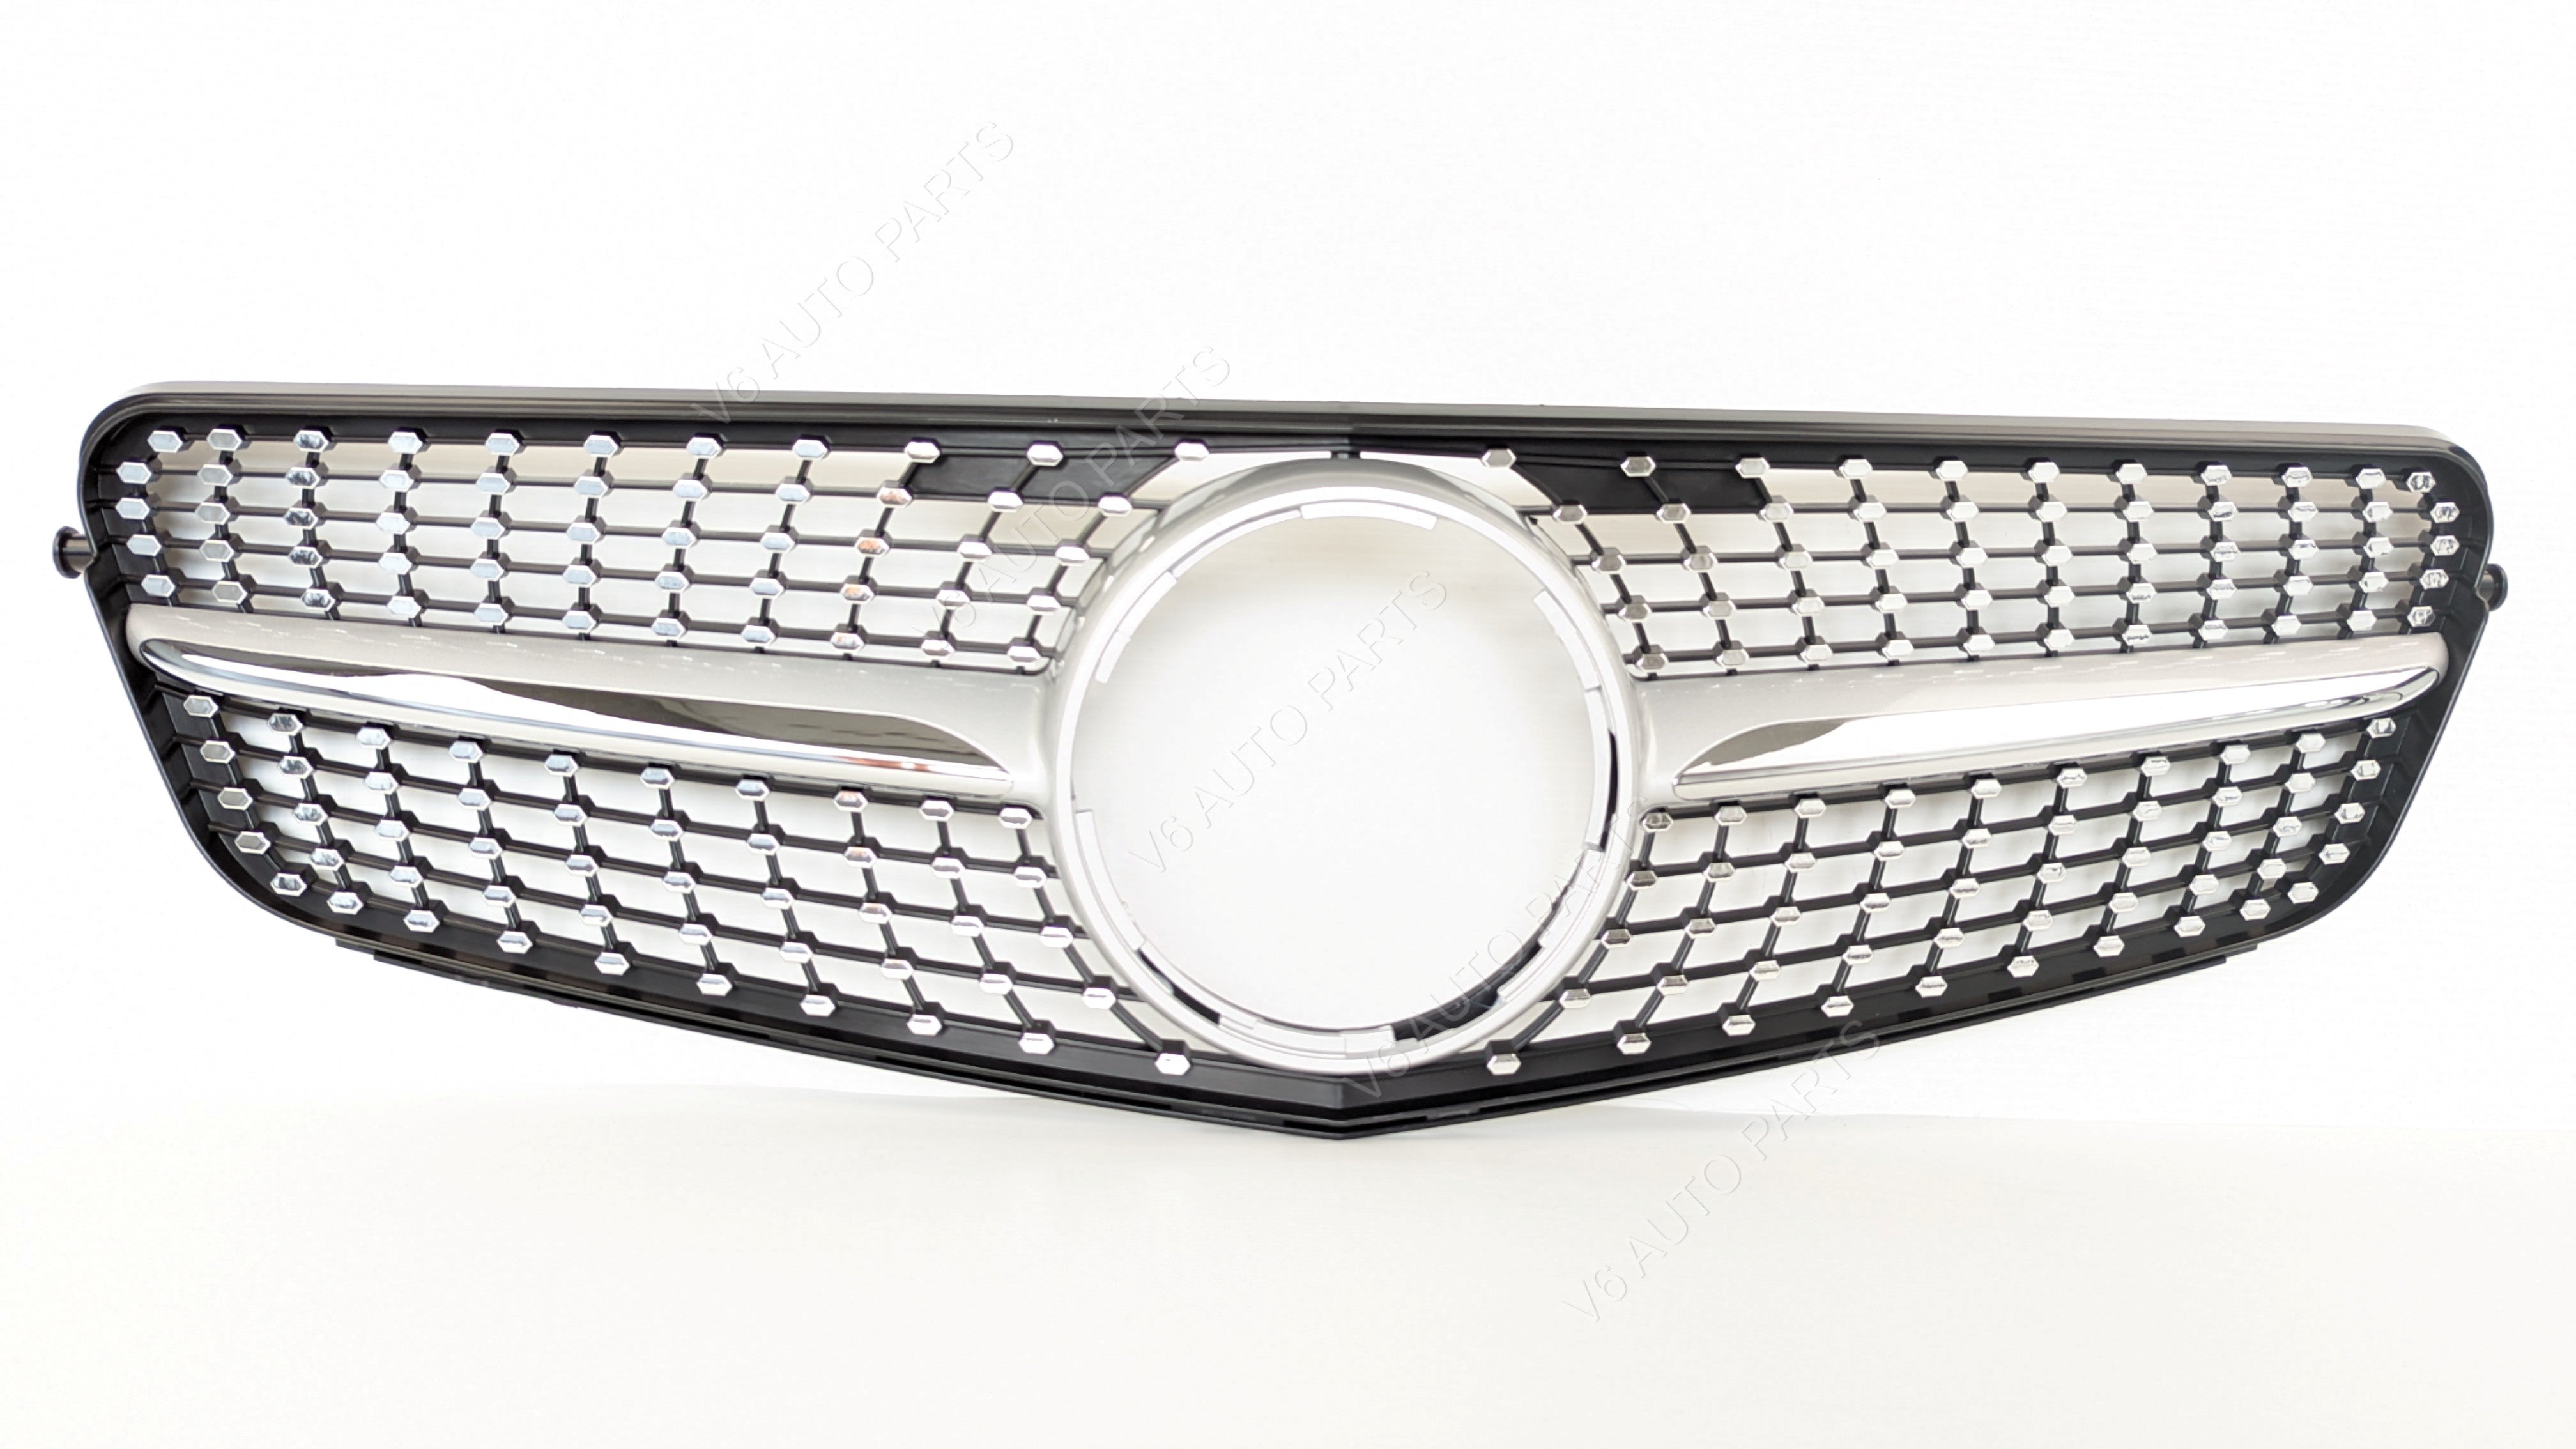 Mercedes C-Class W204 Grill Front Bumper Grille 2007-14 S204 Coupe Diamond Style